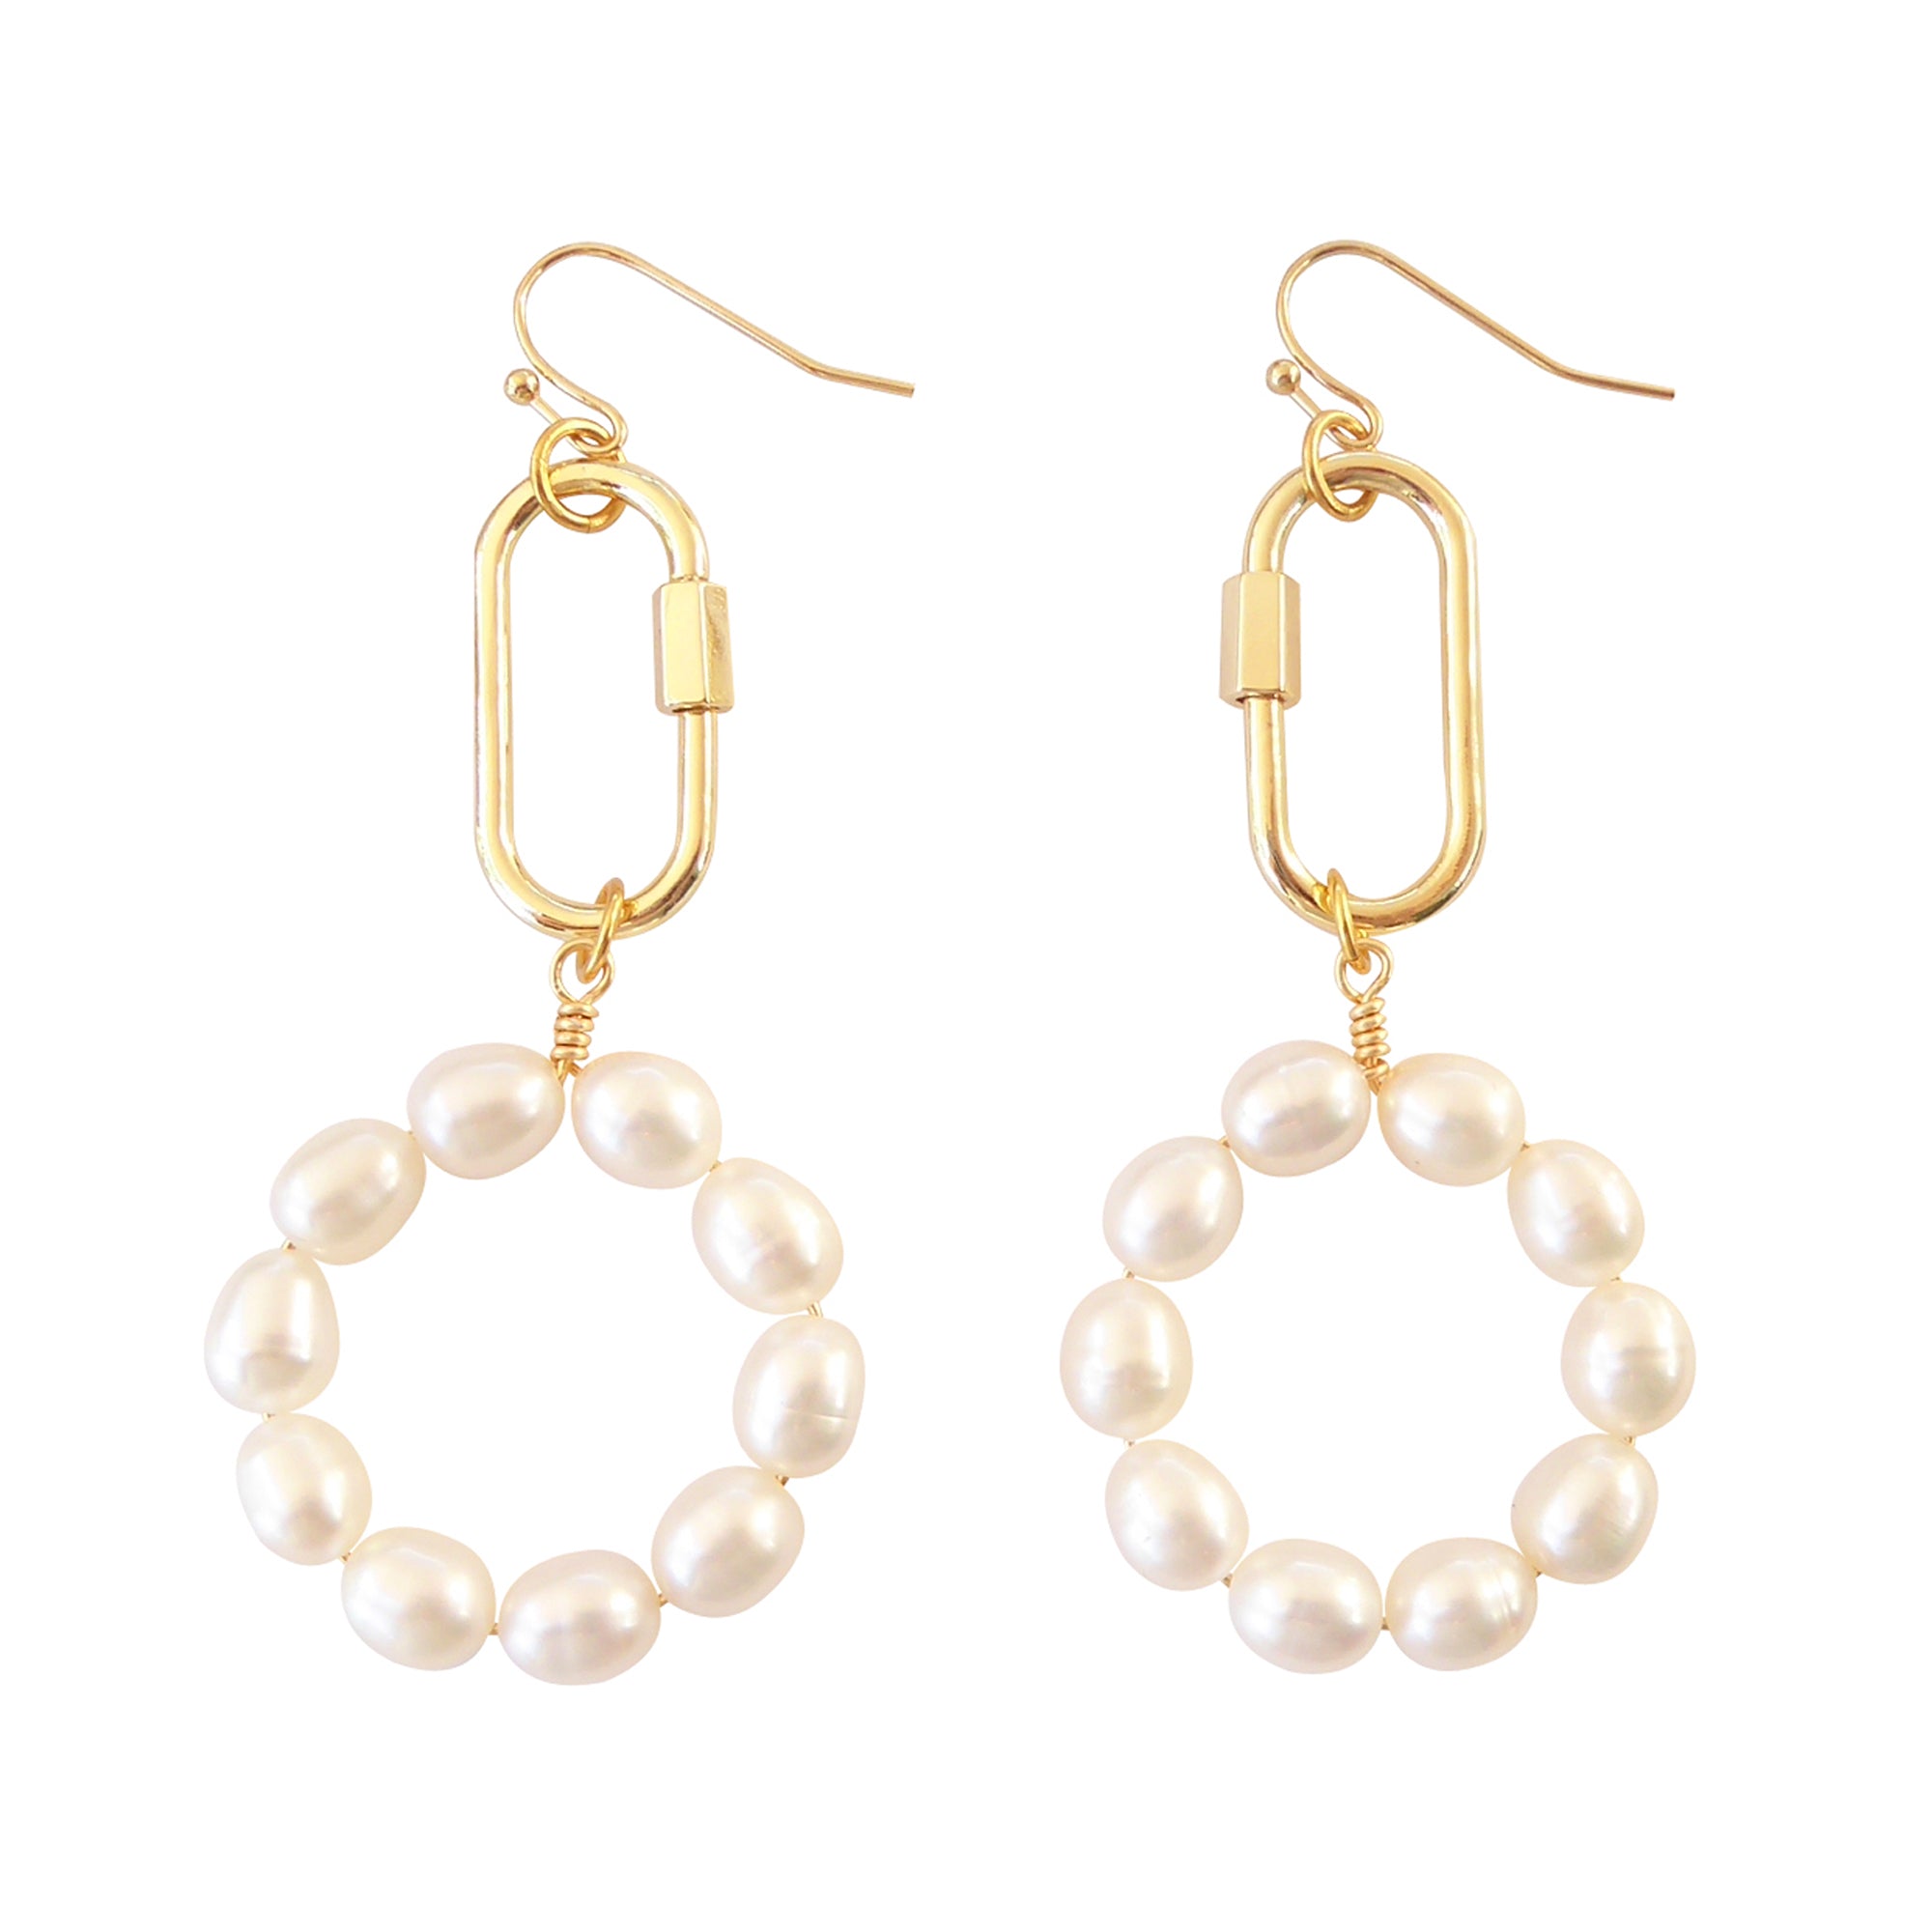 Pearl carabiner earrings by Jenny Dayco 1